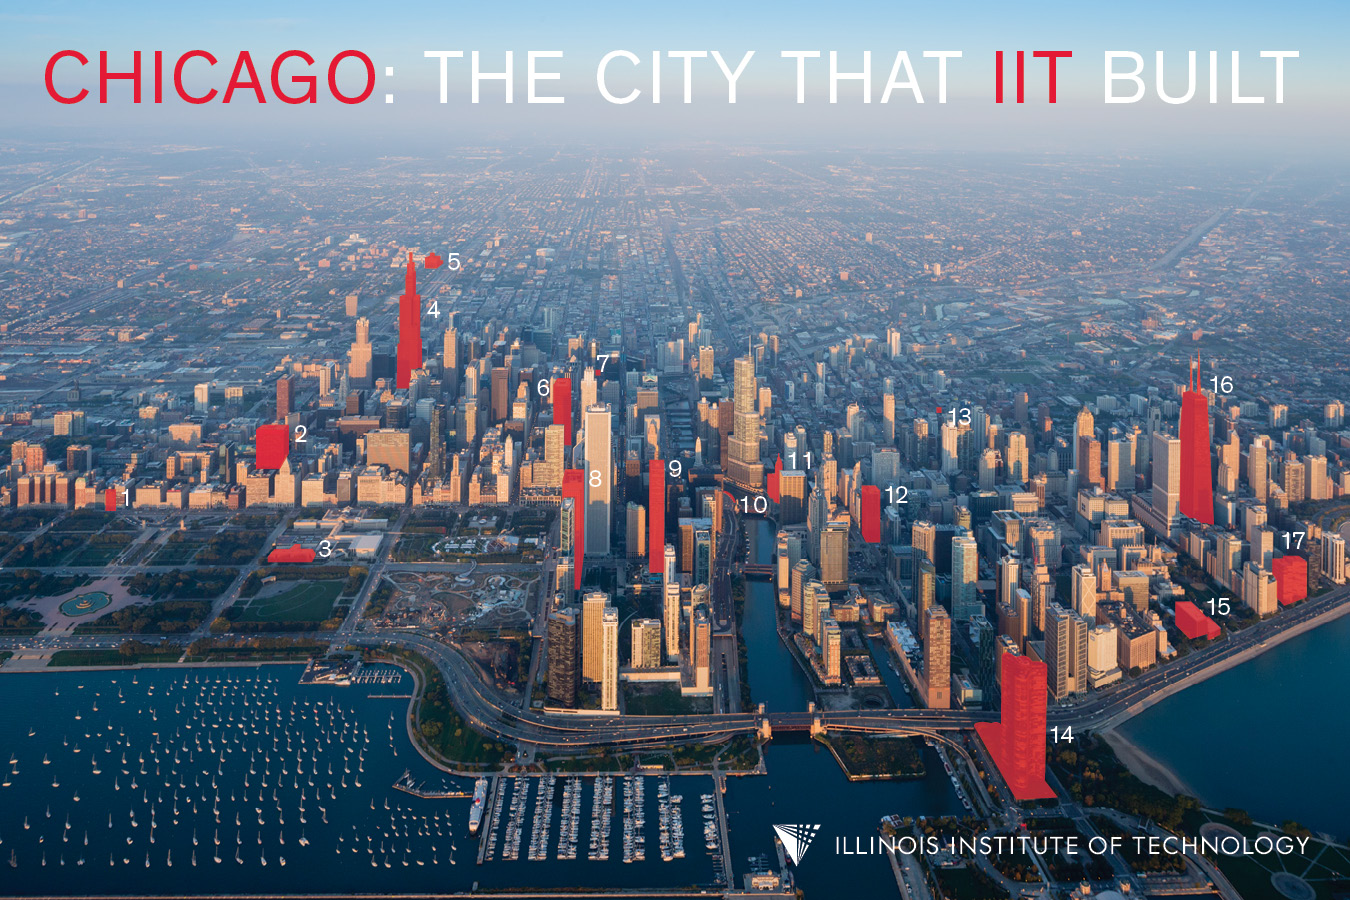 IIT College of Architecture | Chicago: The City That IIT Built